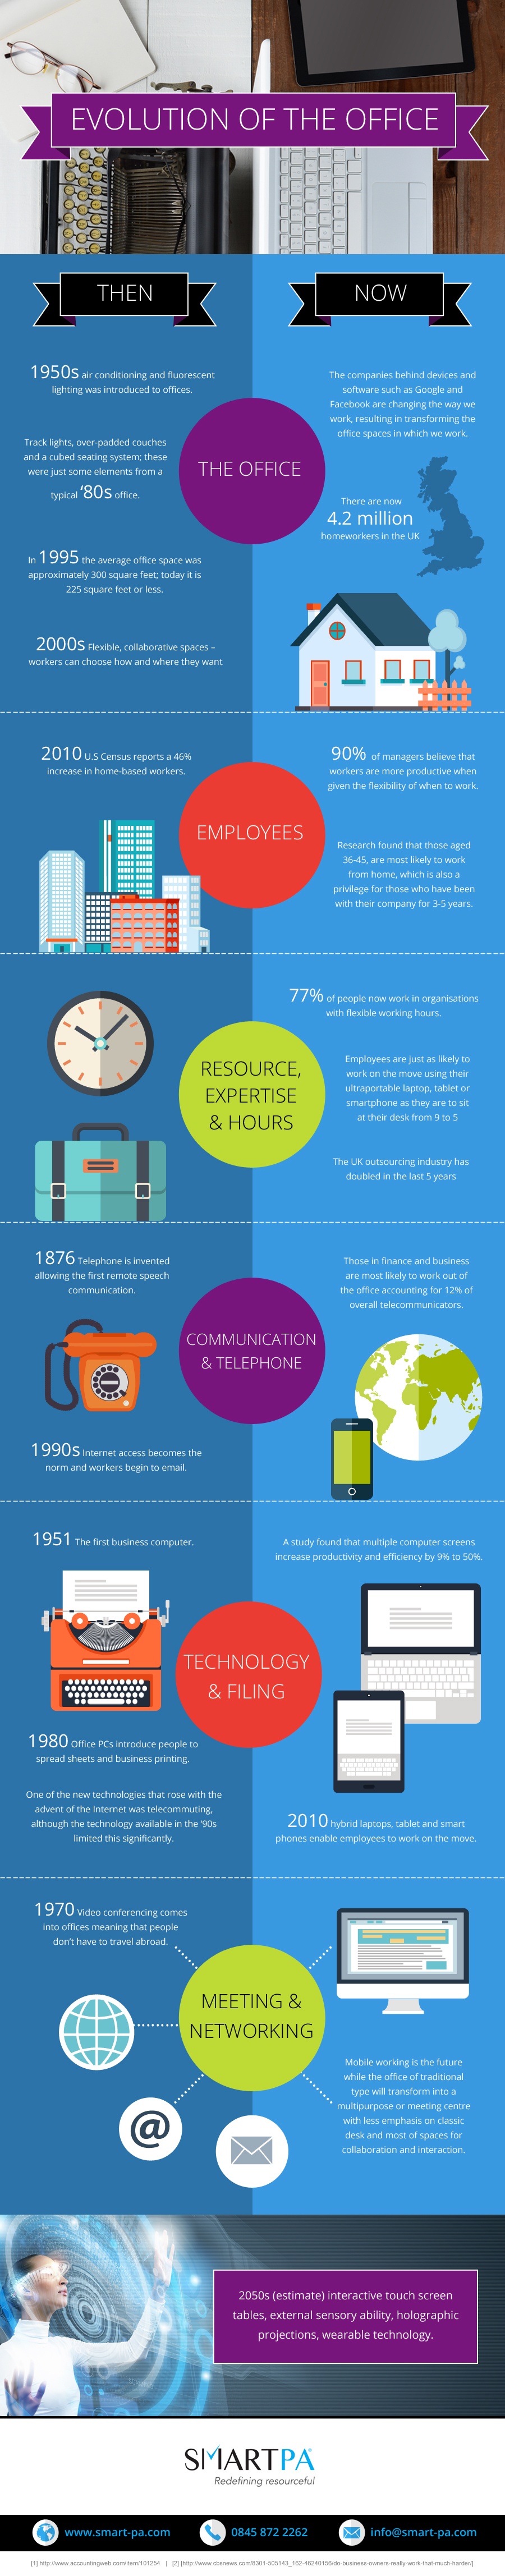 What role does technology play in the modern office evolution? - GoBright